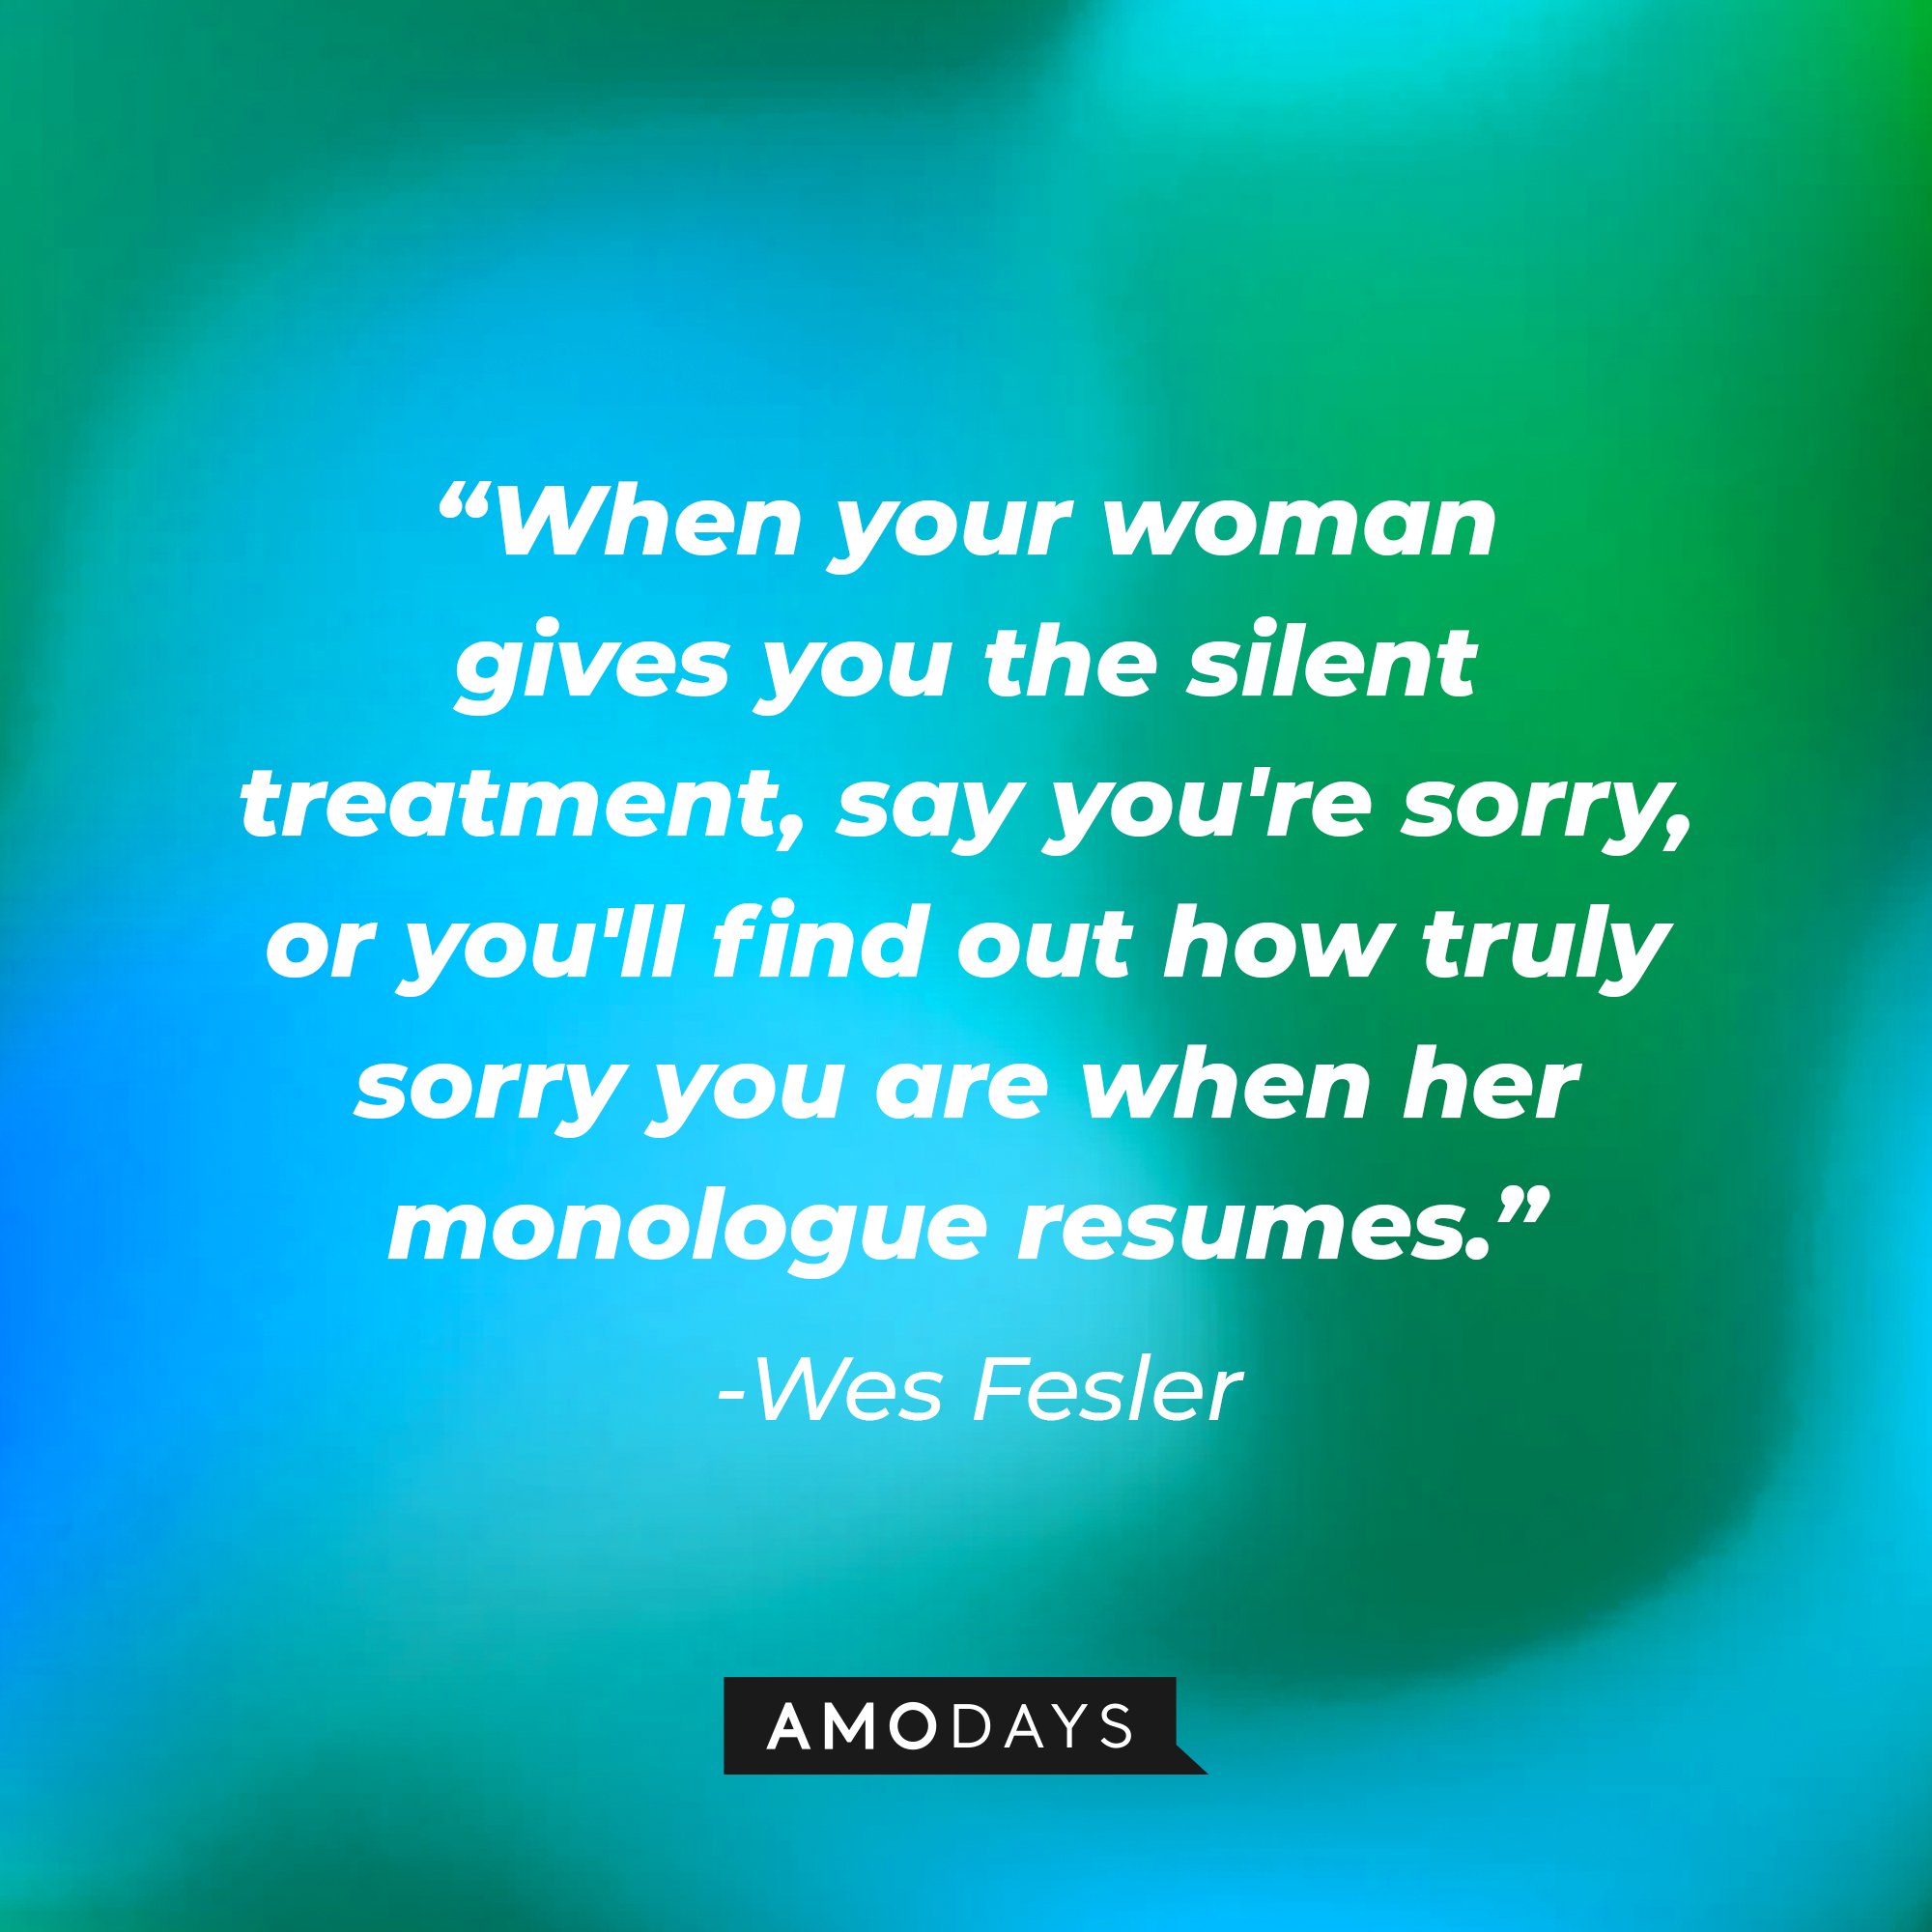 Wes Fesler's quote:\\\\u00a0"When your woman gives you the silent treatment, say you're sorry, or you'll find out how truly sorry you are when her monologue resumes."\\\\u00a0| Image: AmoDays